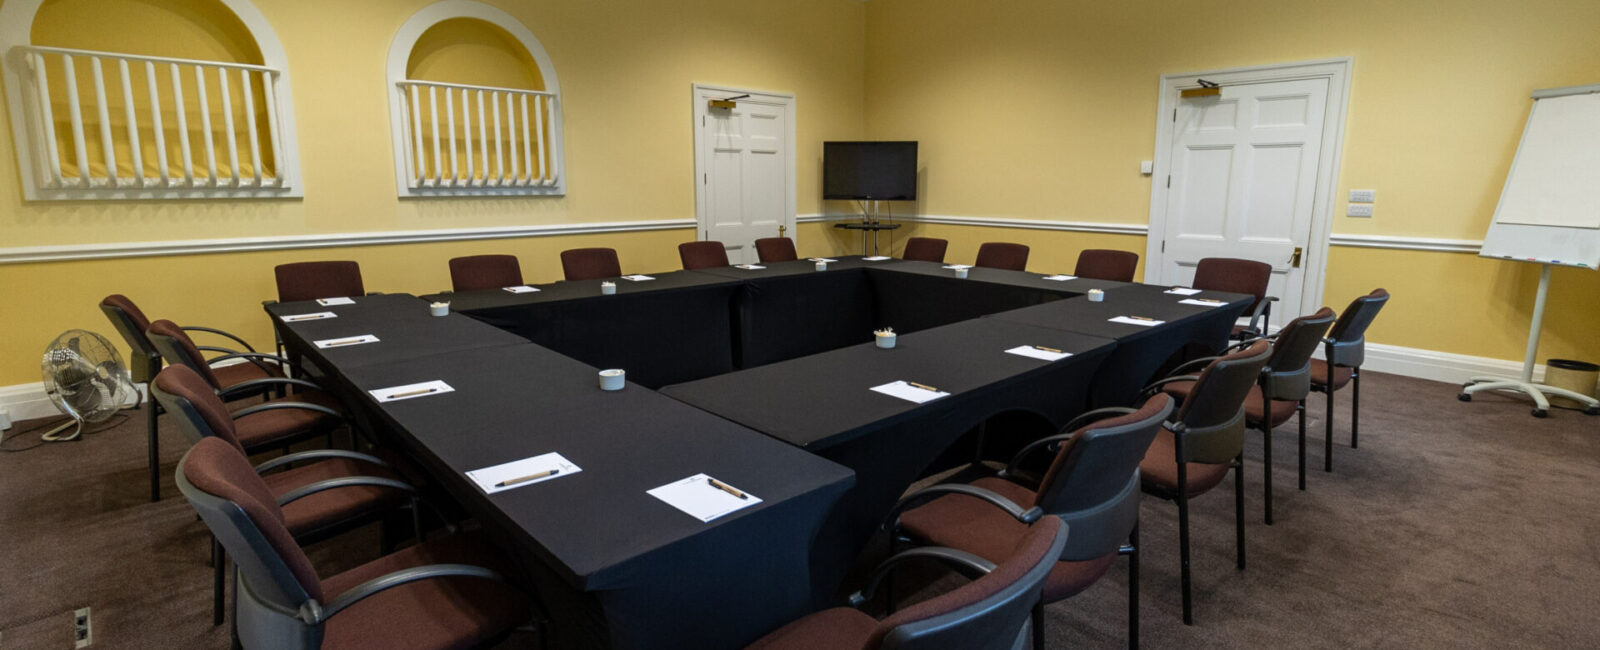 The Greening conference room, laid out in a boardroom style to accommodate up to 18 people.